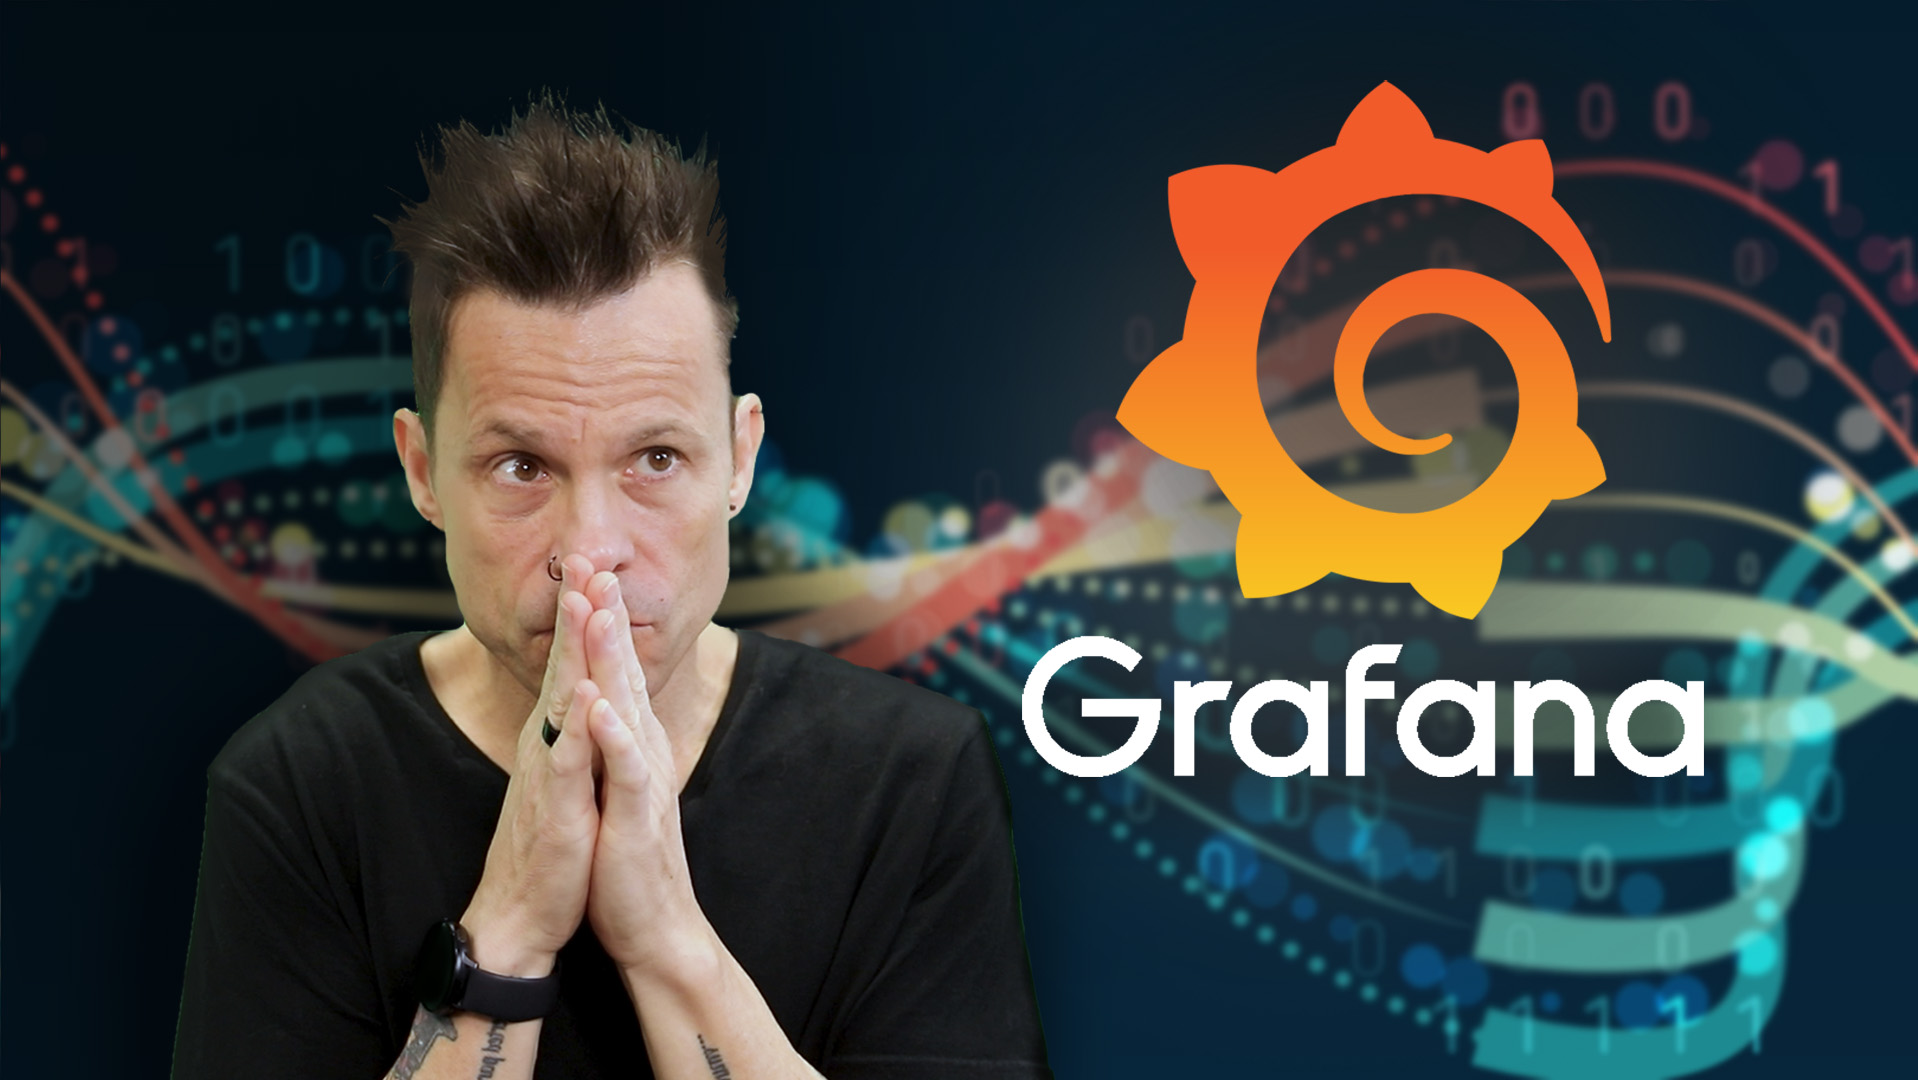 How to Install the Grafana data visualization system in minutes on AlmaLinux